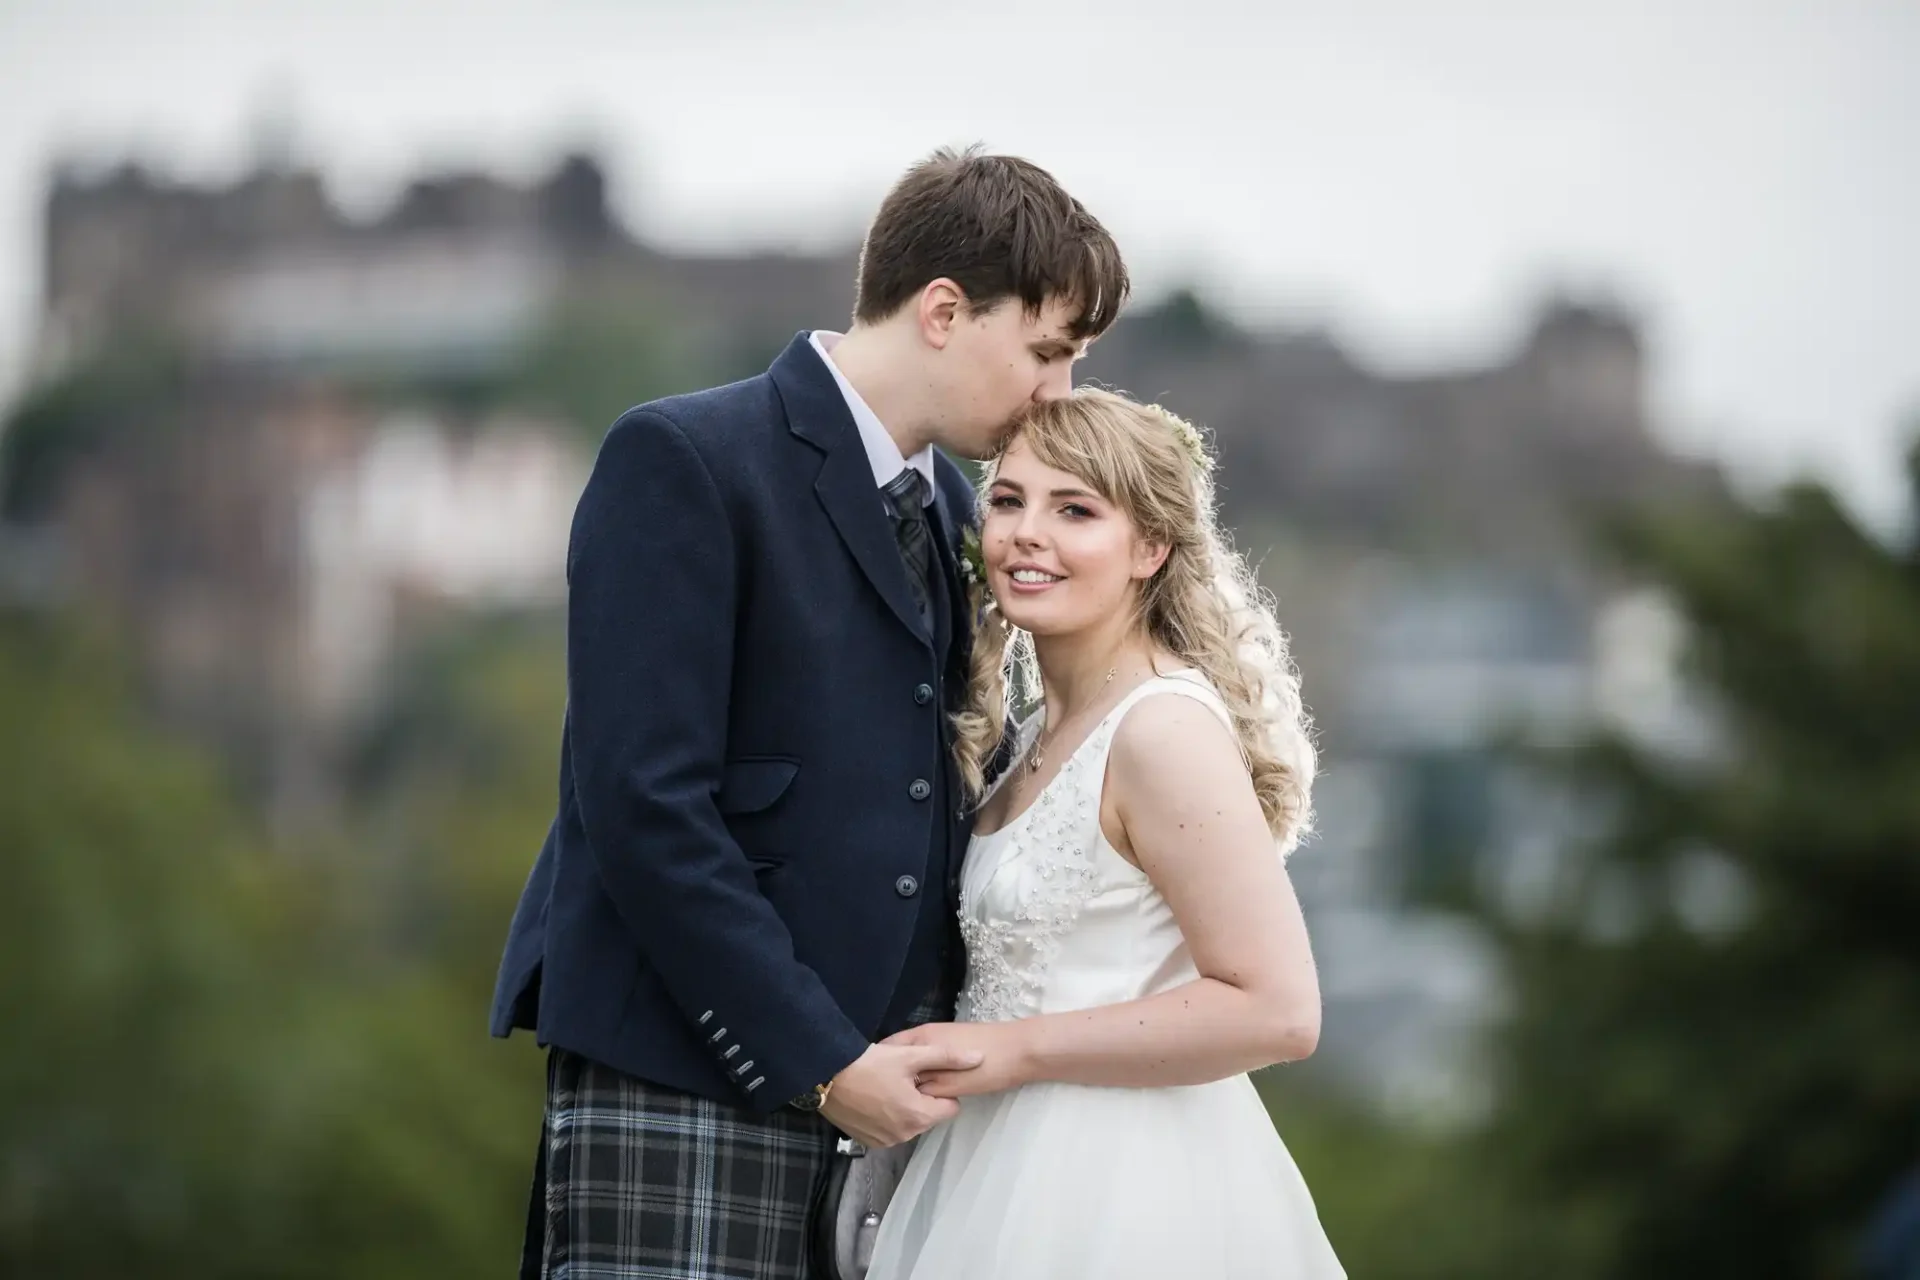 A newlywed couple in wedding attire embrace, with the groom kissing the bride's forehead, against a backdrop featuring edinburgh castle.